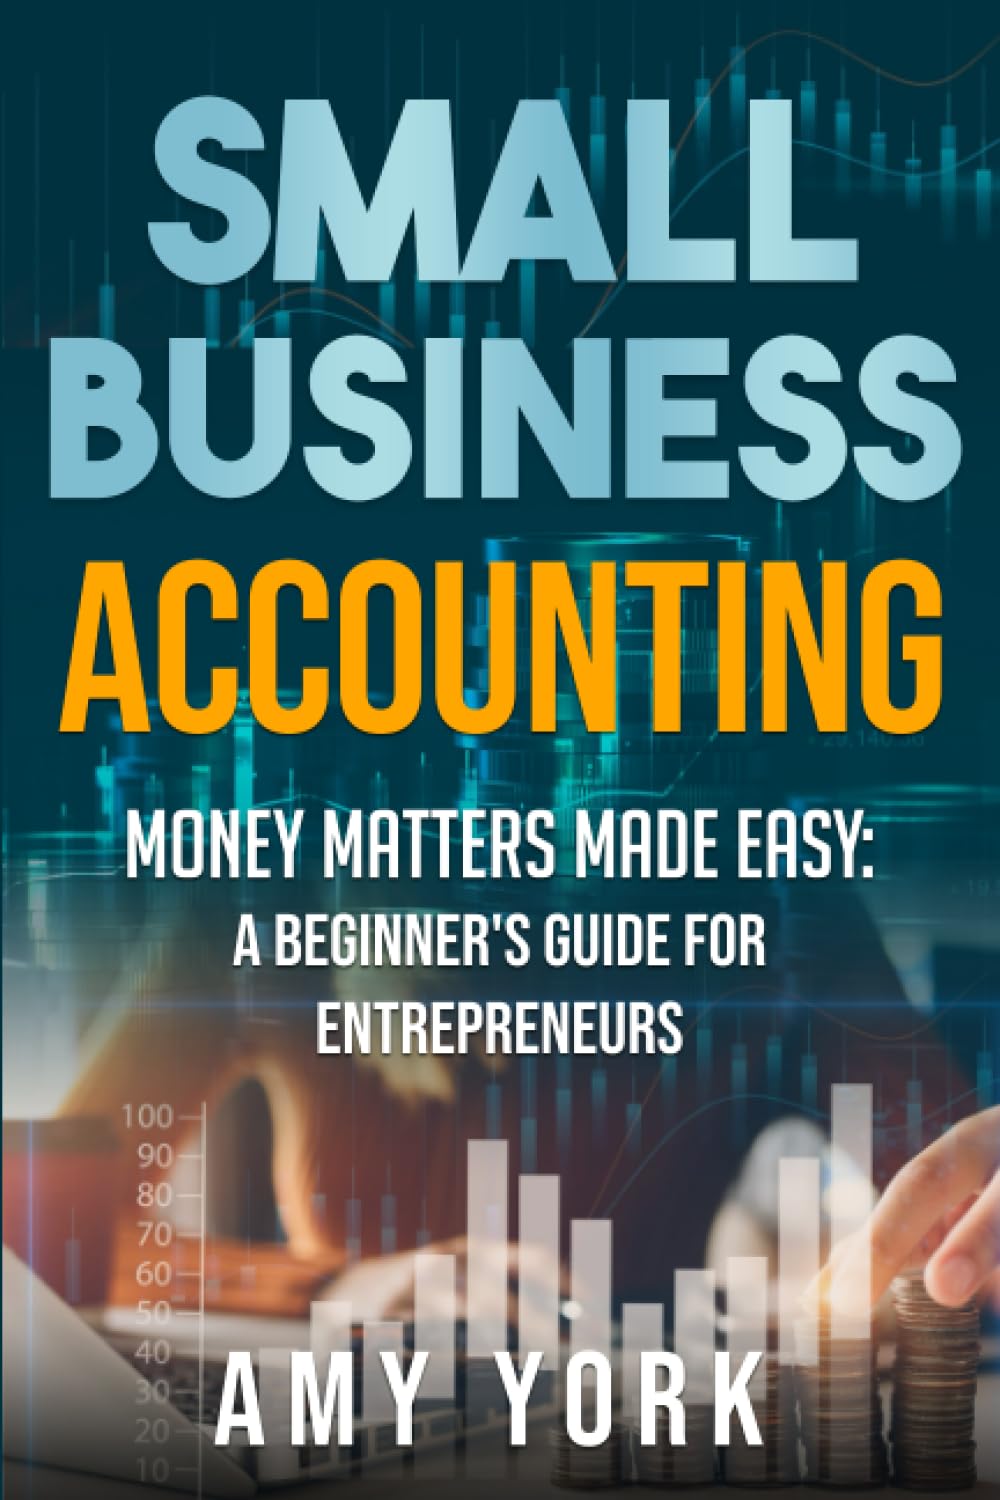 Small Business Accounting: Money Matters Made Easy: A Beginner's Guide for Entrepreneurs